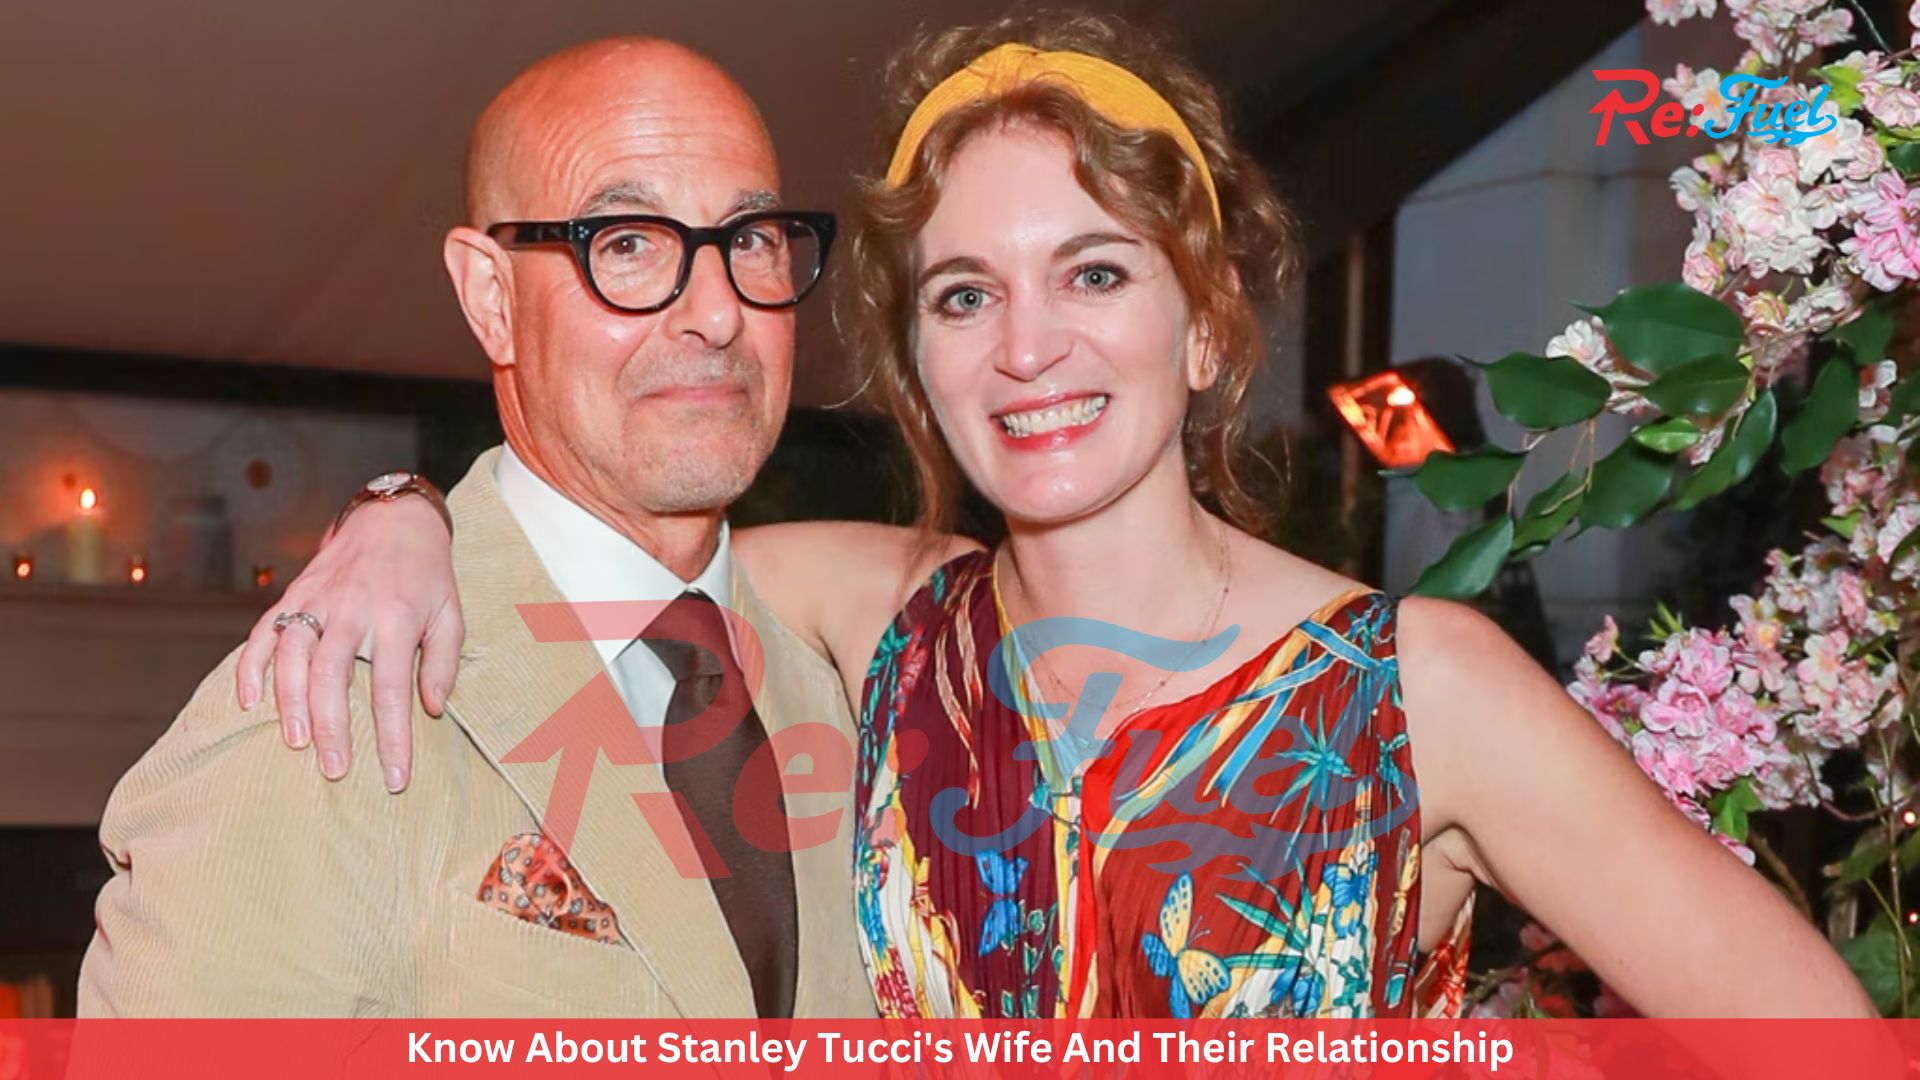 Know About Stanley Tucci's Wife And Their Relationship